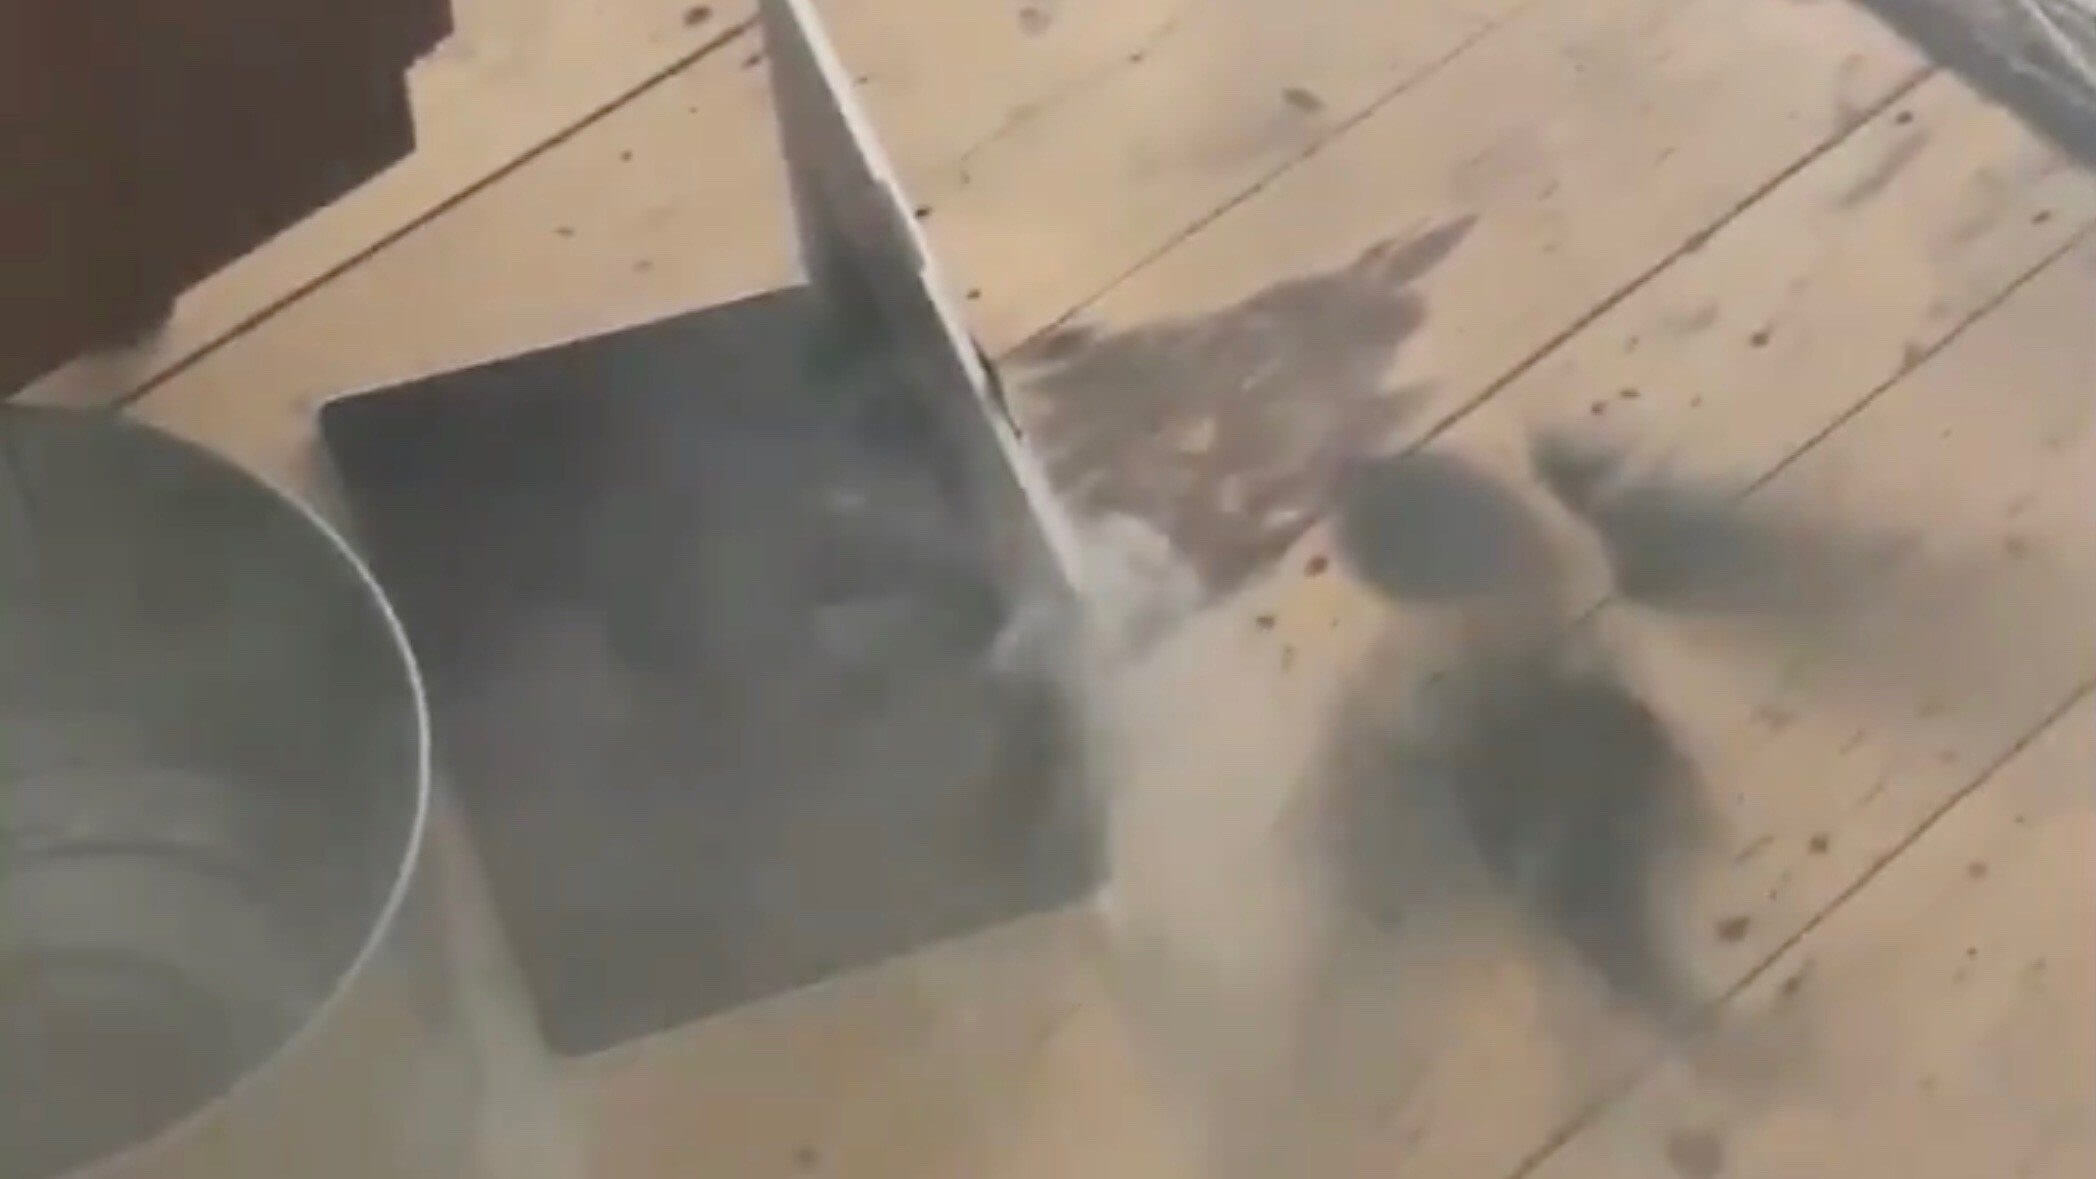 Watch a MacBook Pro pumping out smoke after it exploded during normal use